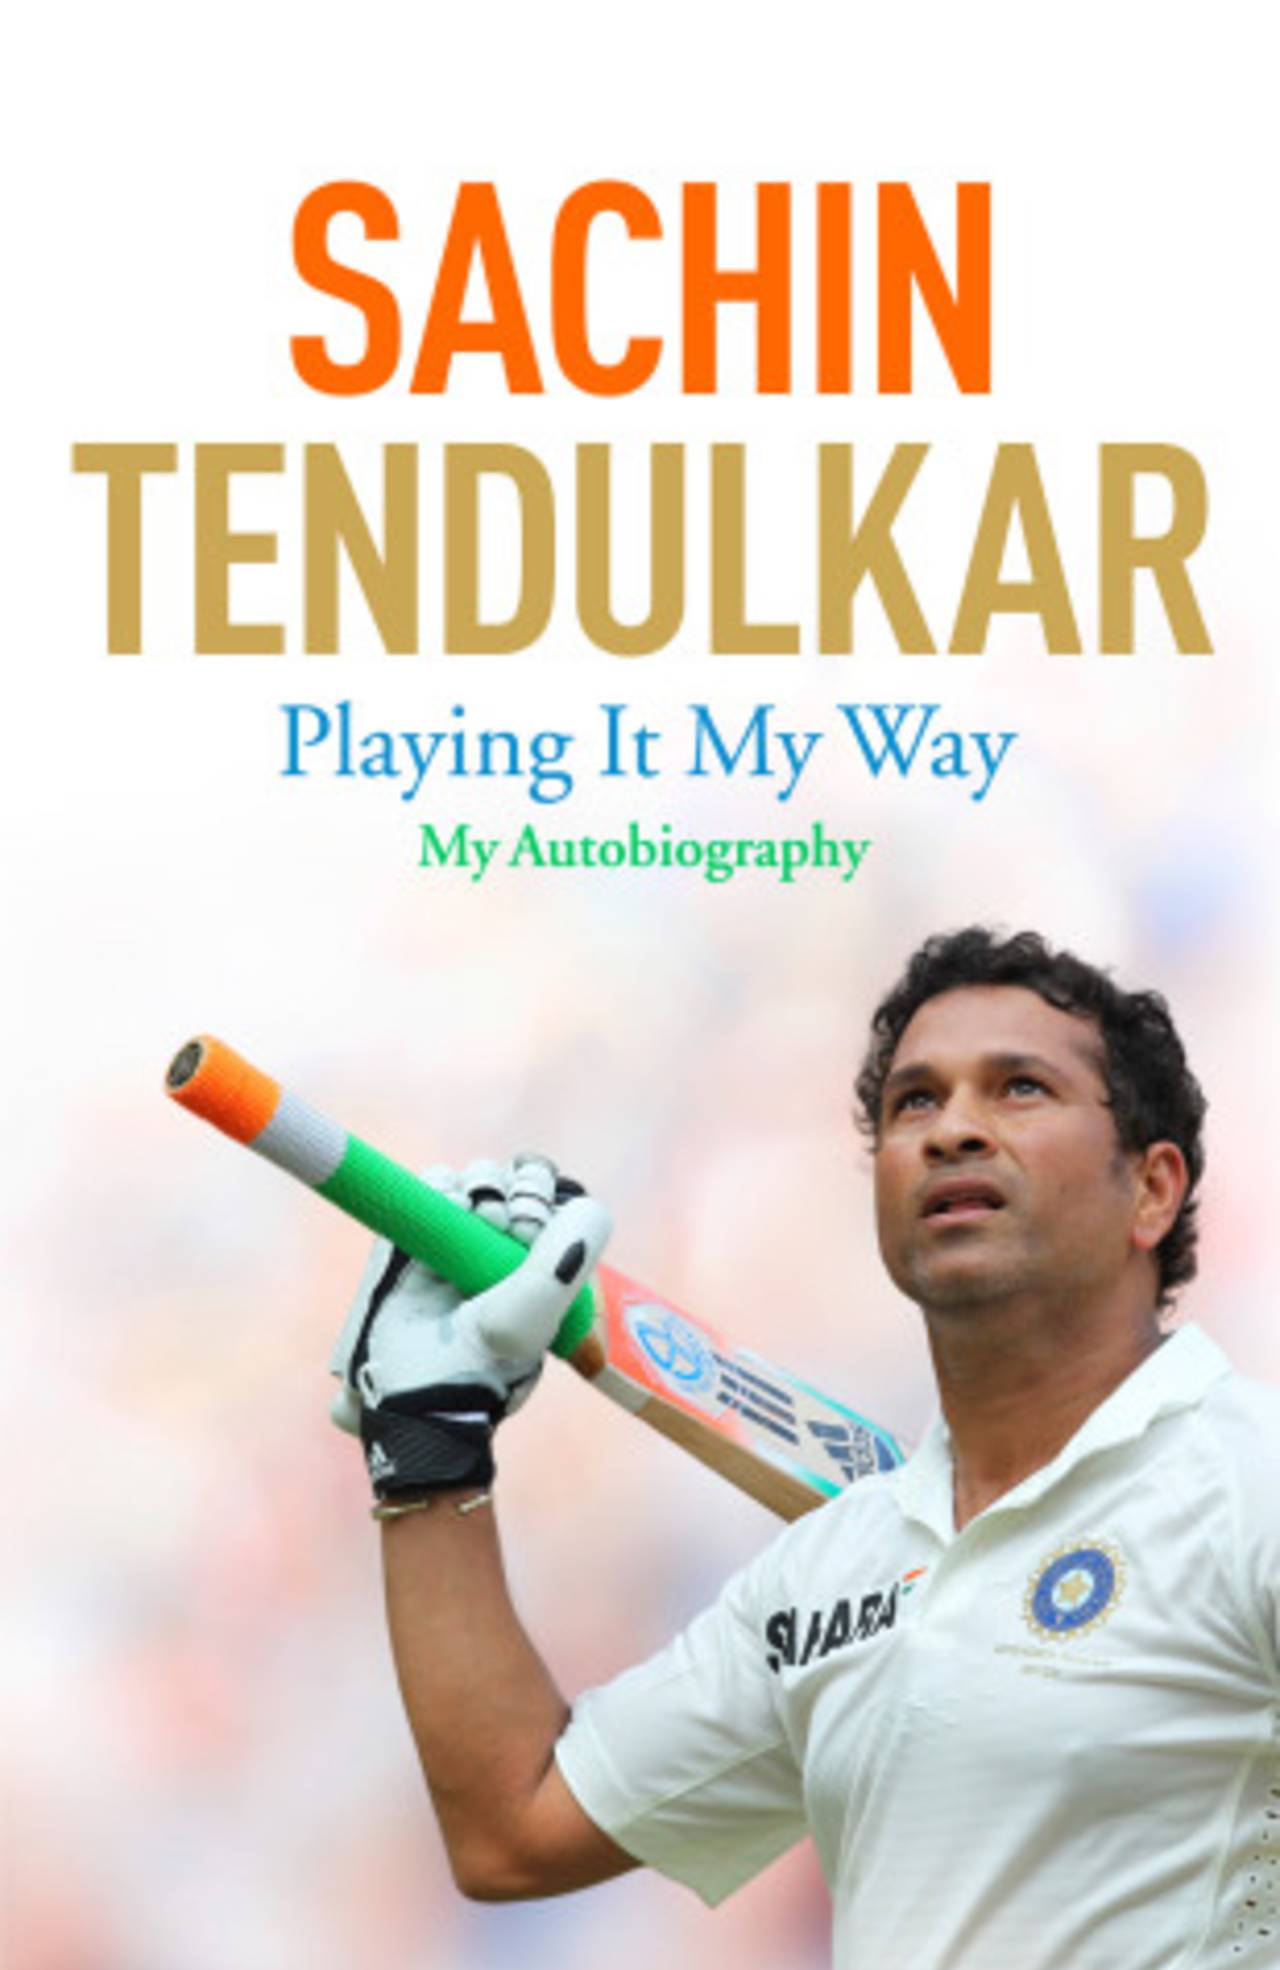 Cover image of <i>Playing it My Way: My Autobiography</i> by Sachin Tendulkar